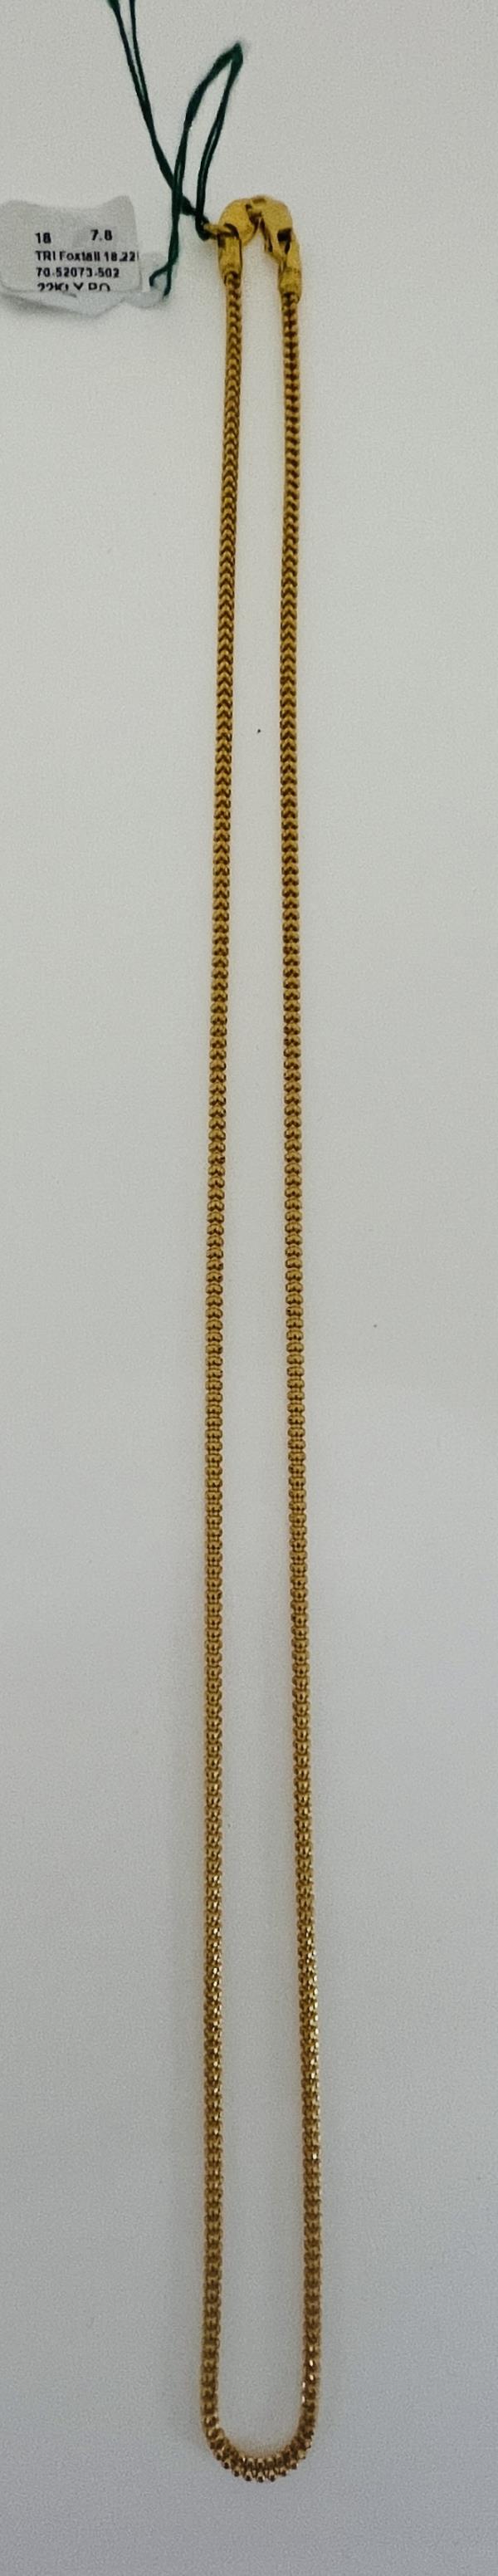 22KT GOLD CHAIN 20" 7.8GM